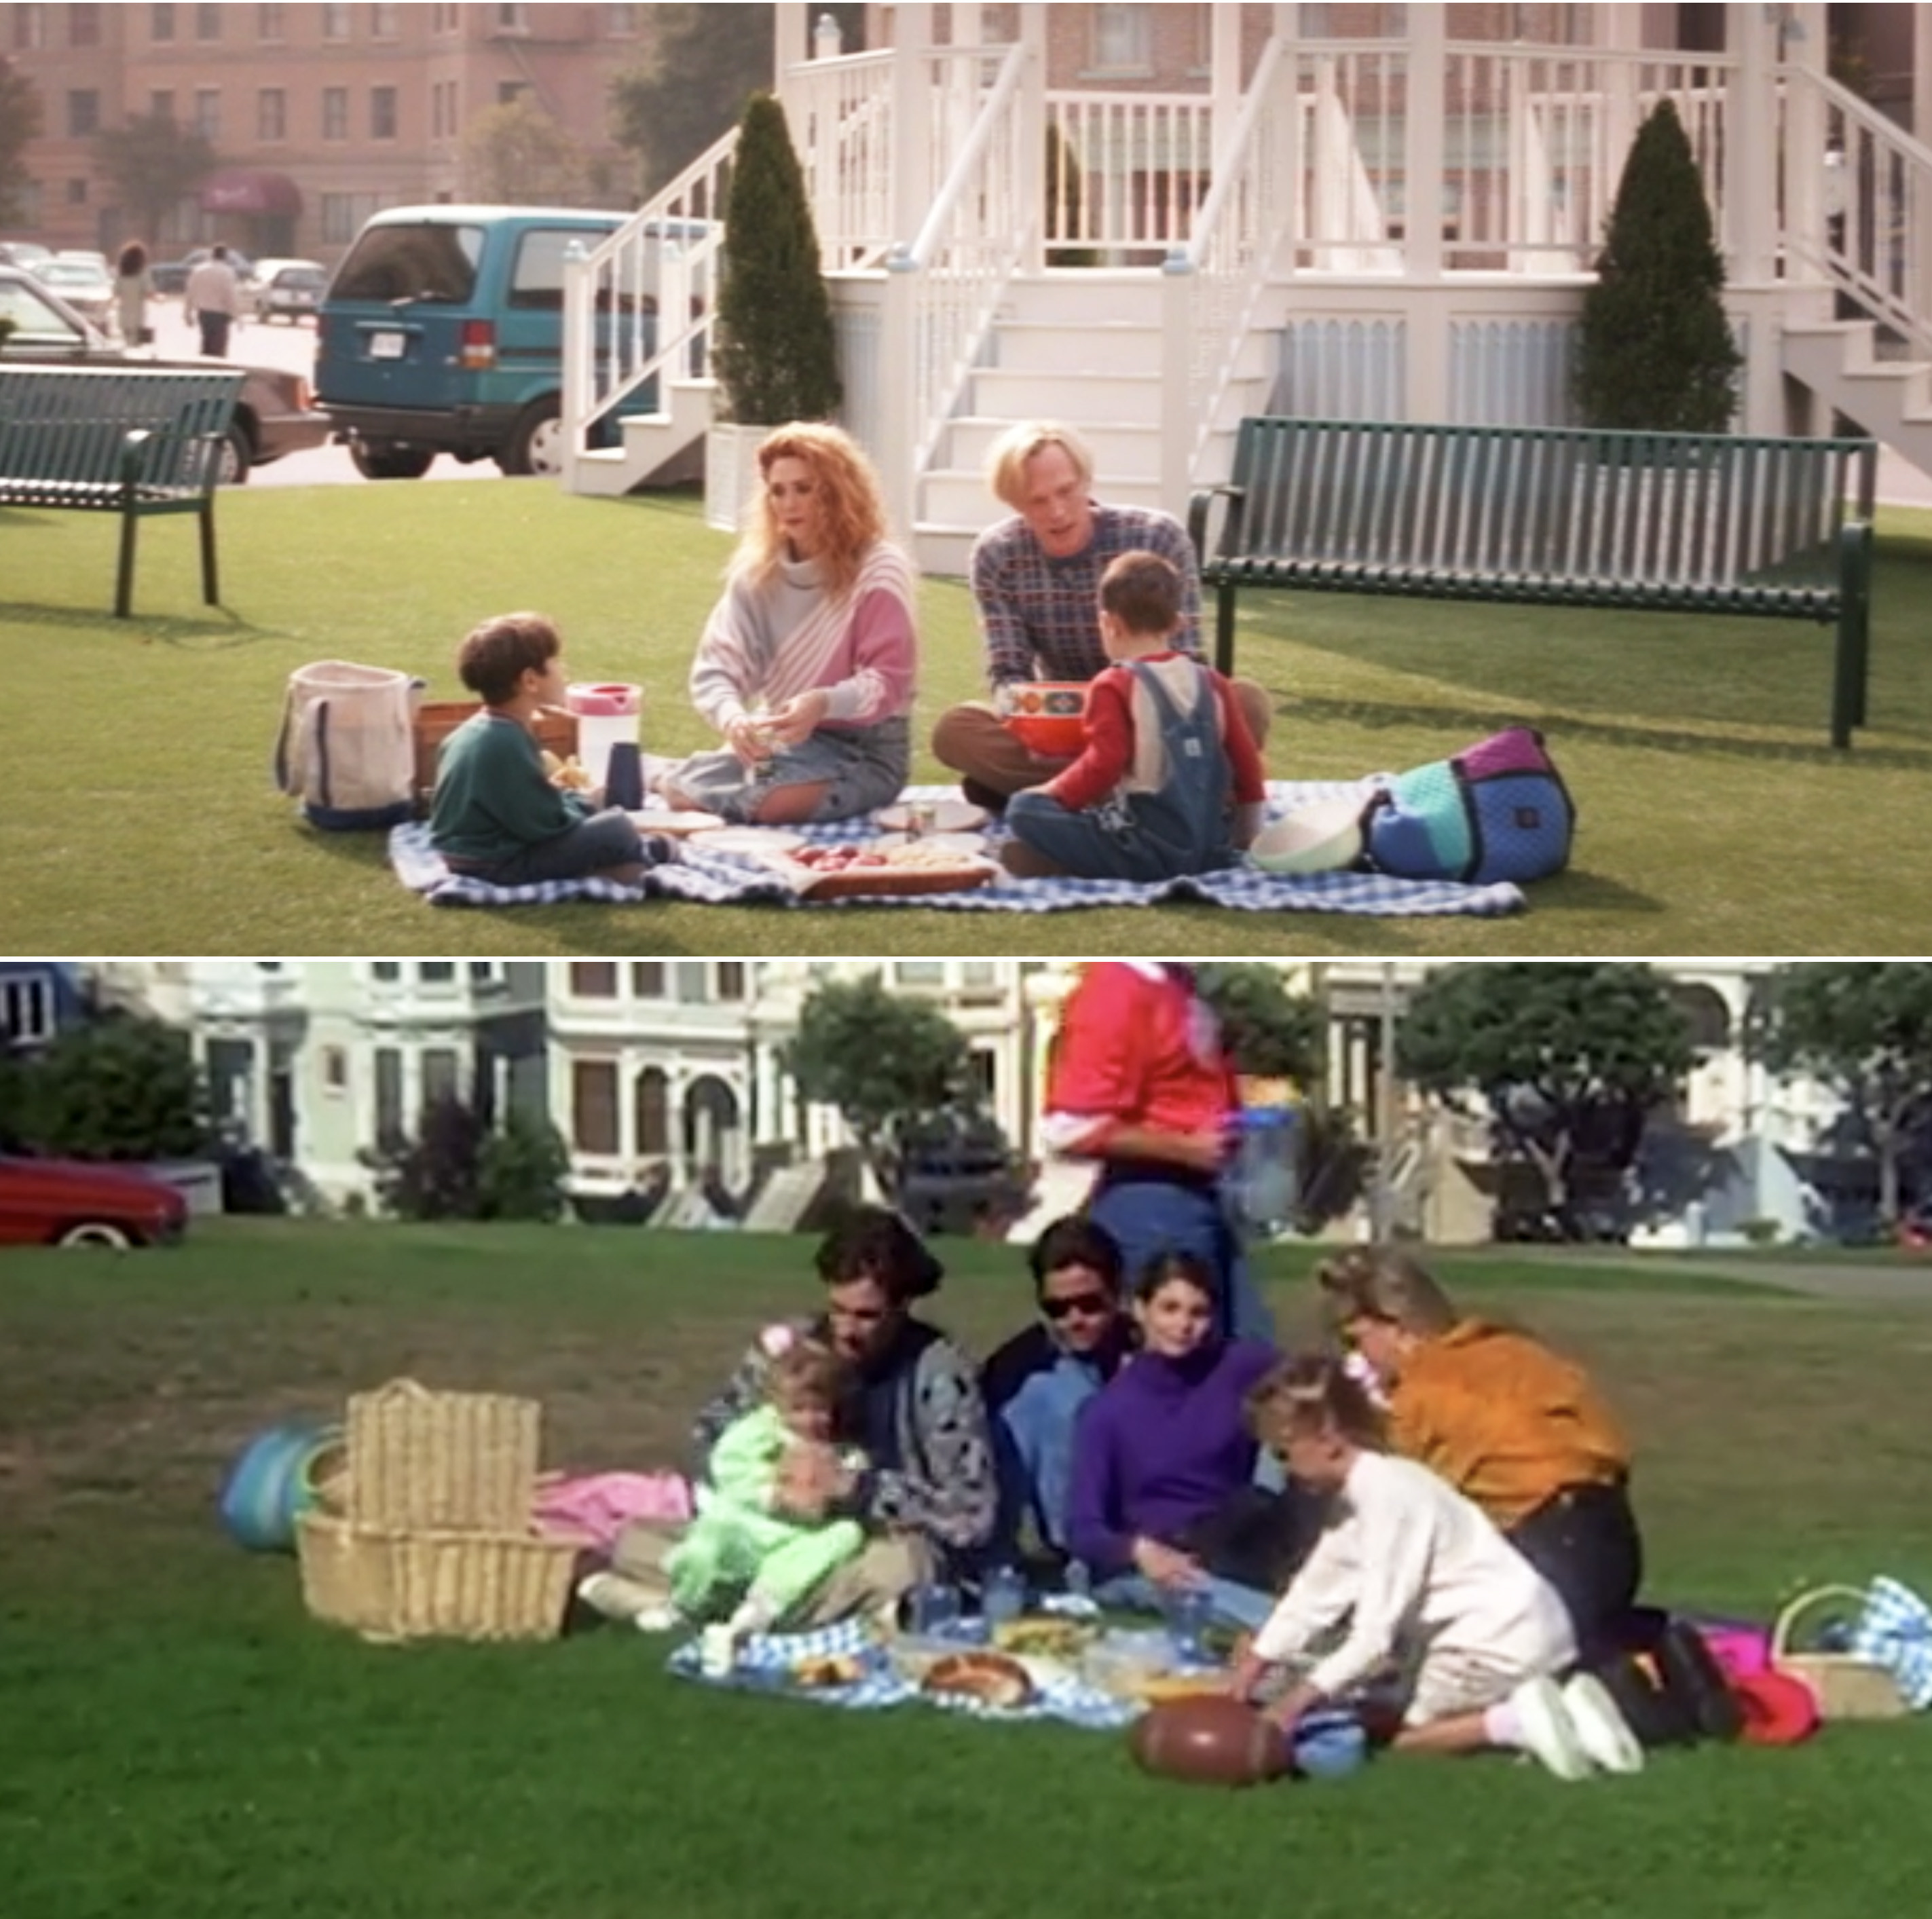 Wanda, Vision, Billy, and Tommy having a picnic vs. The Tanners having a picnic on Full House